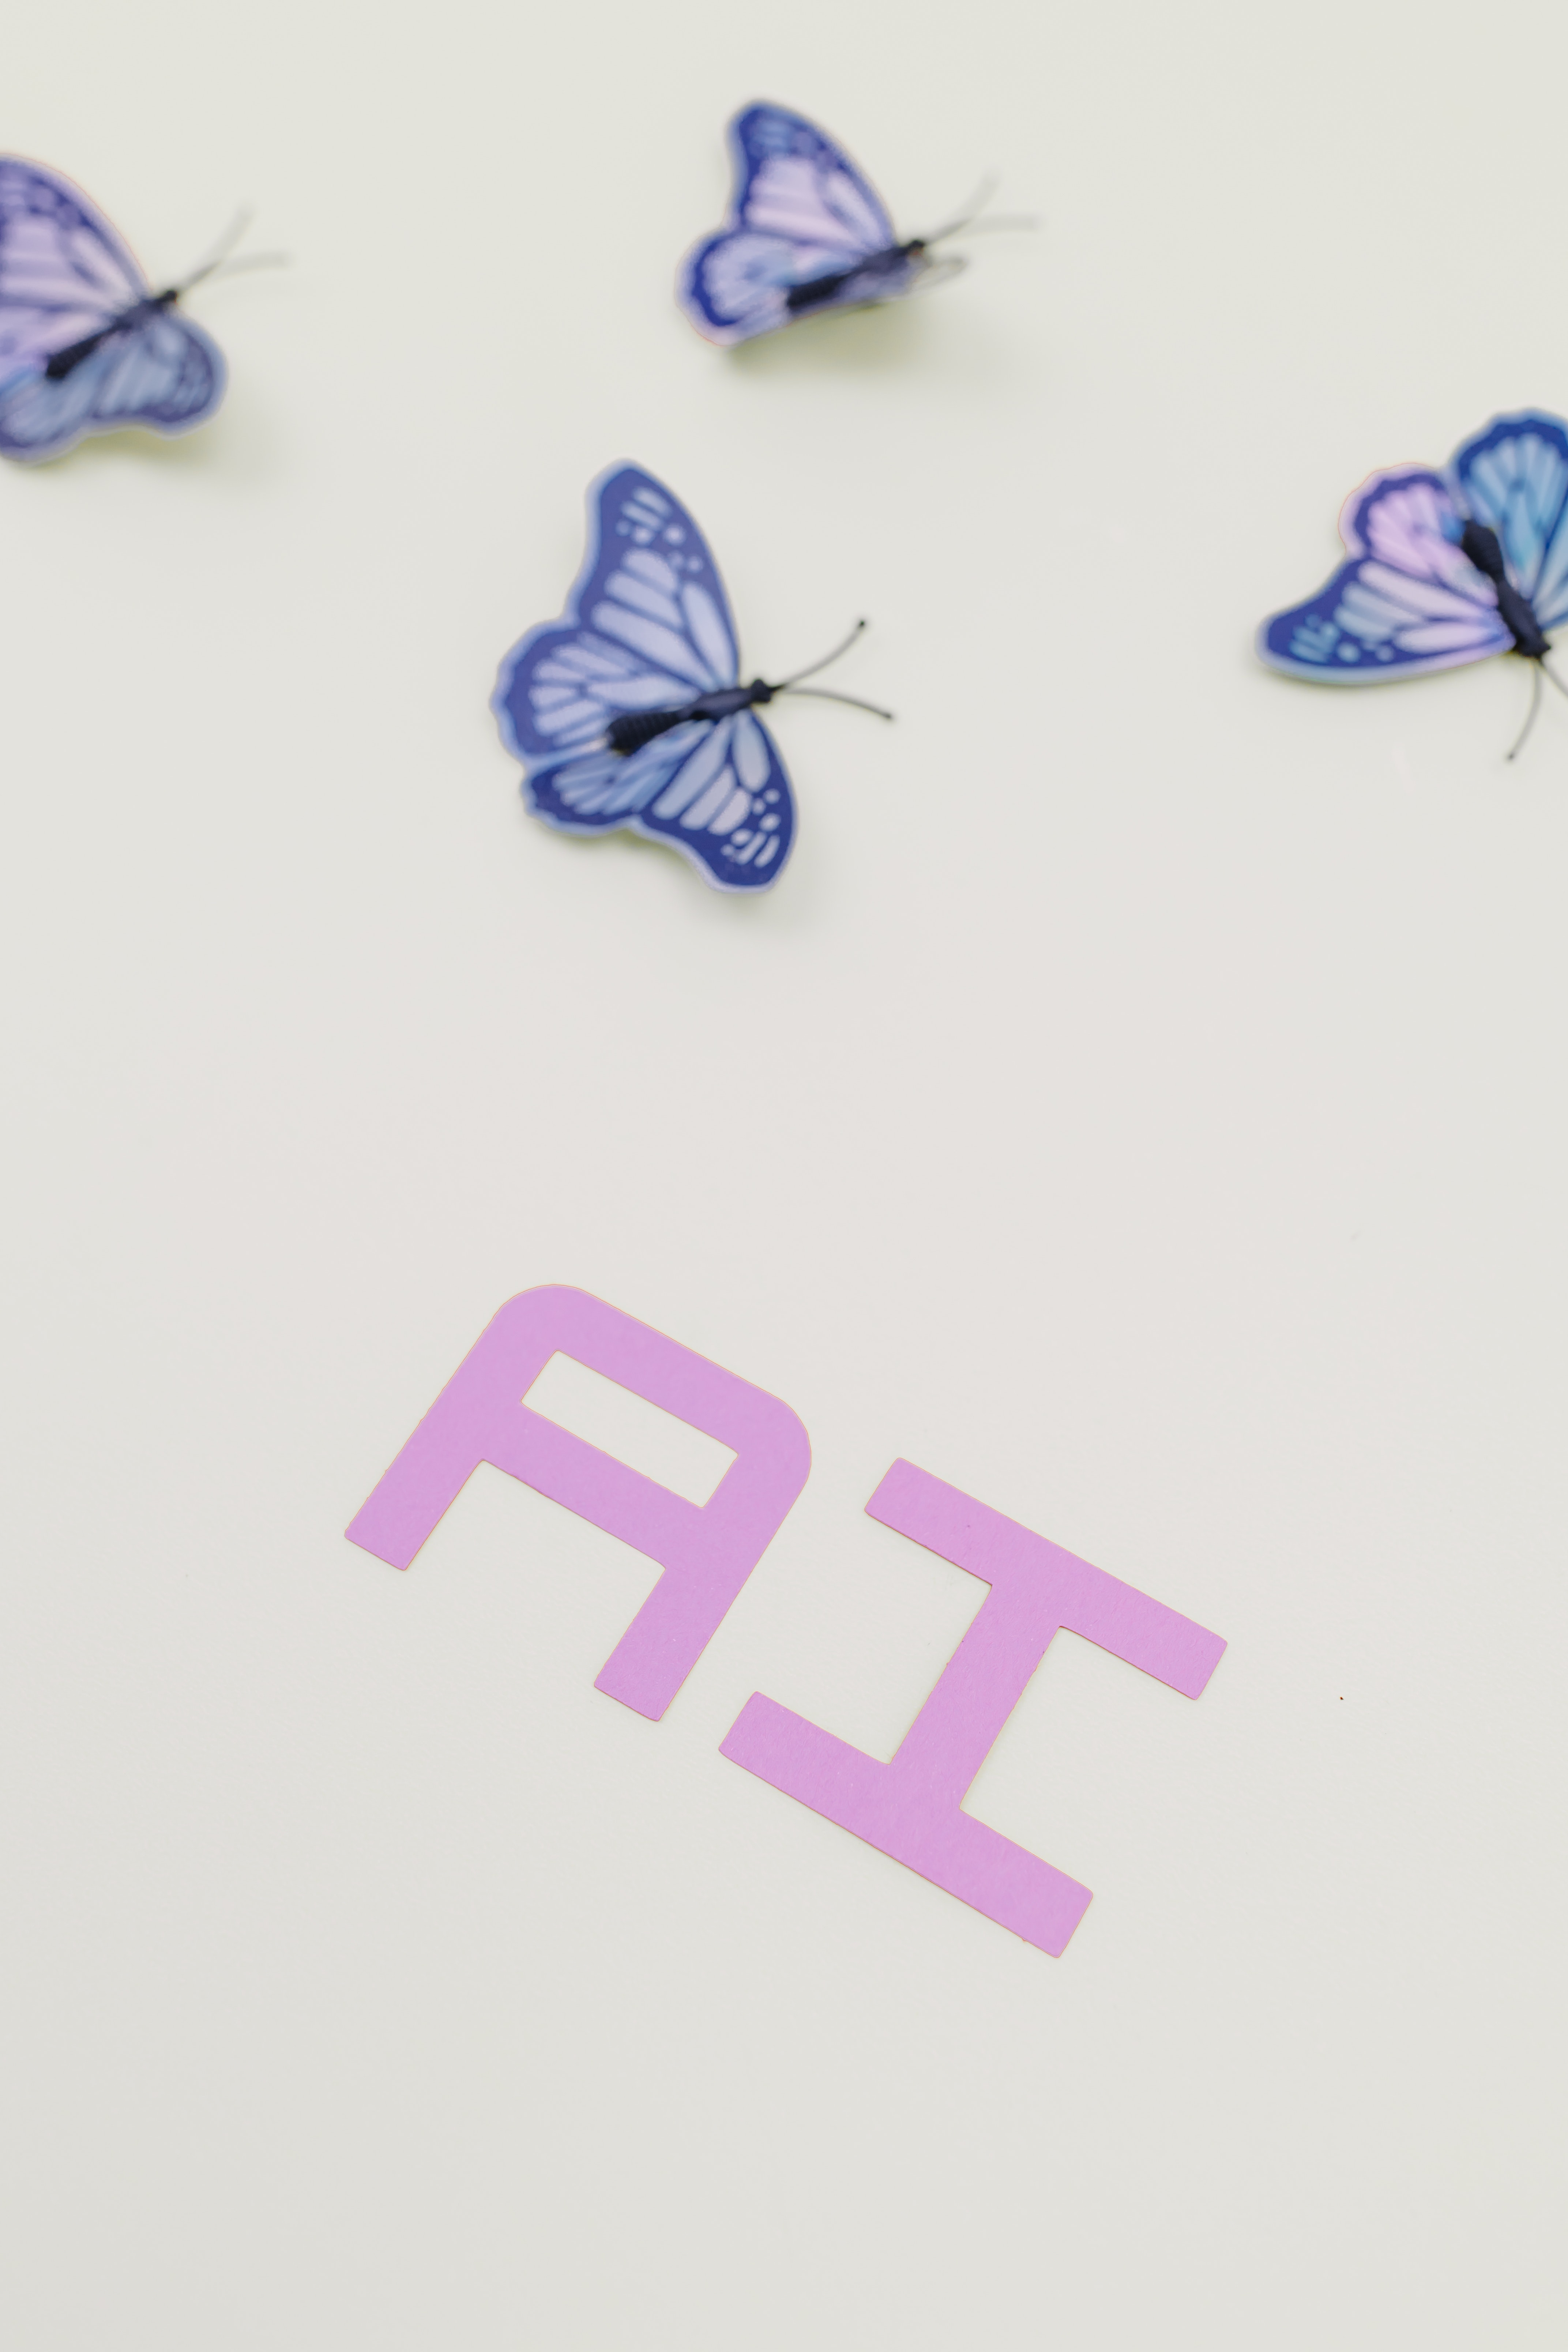 AI with butterflies